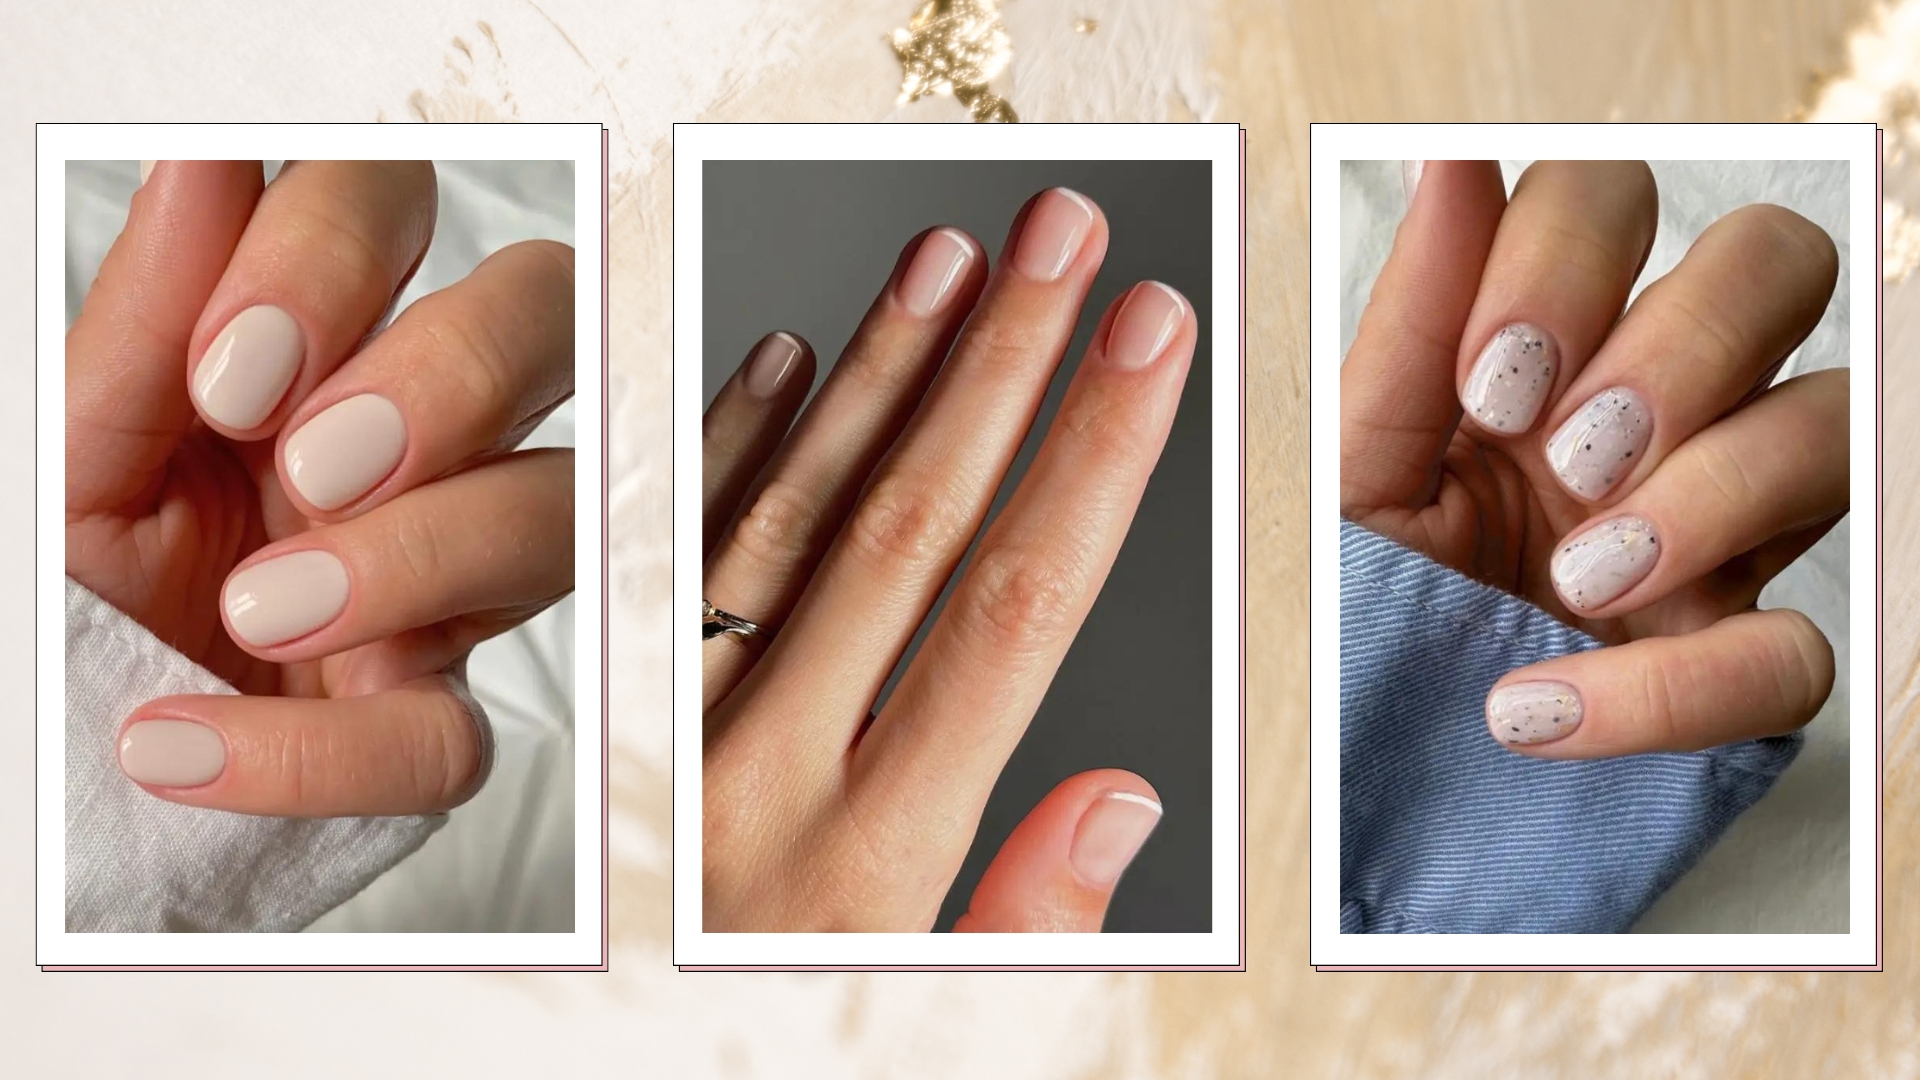 Get The Perfect Christmas Nails This Holiday Season! – GellyDrops